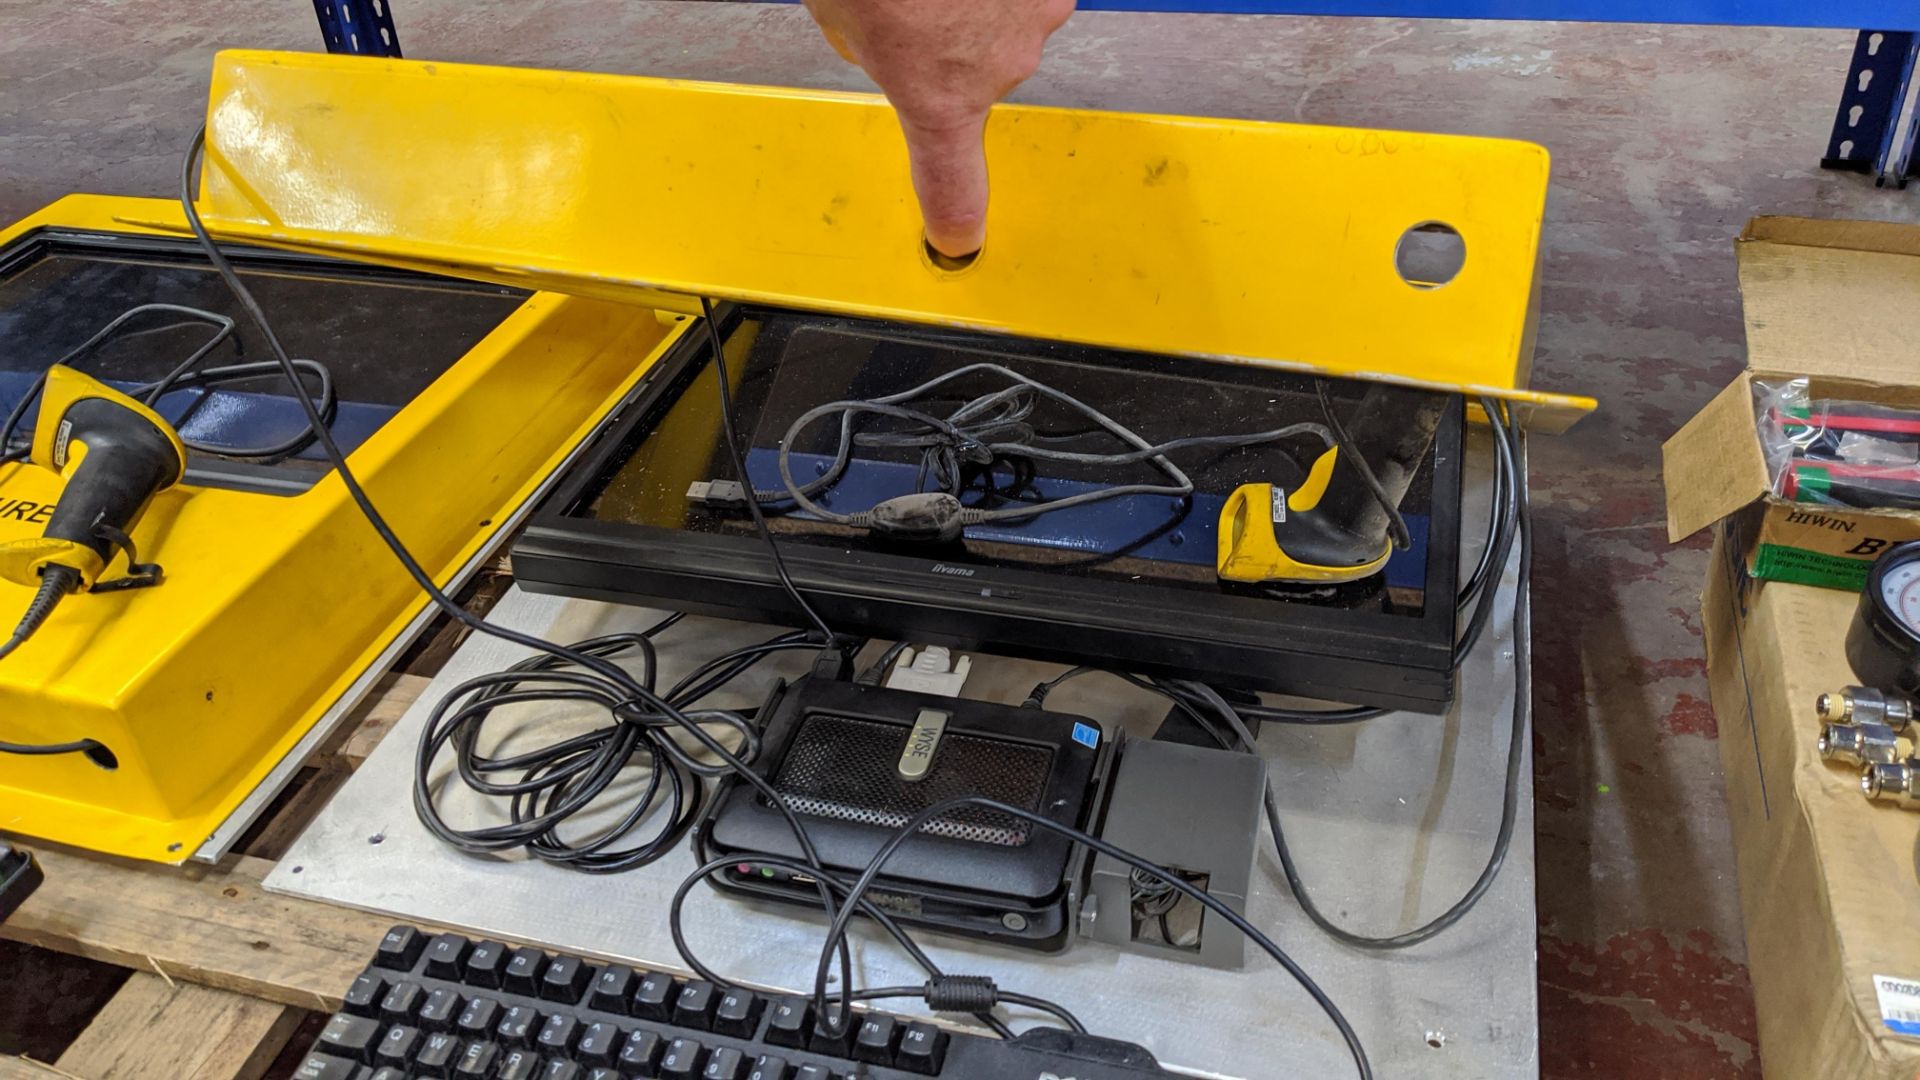 4 off Wyse wall-mountable factory terminal systems, each comprising large yellow casing, hand-held b - Image 12 of 13